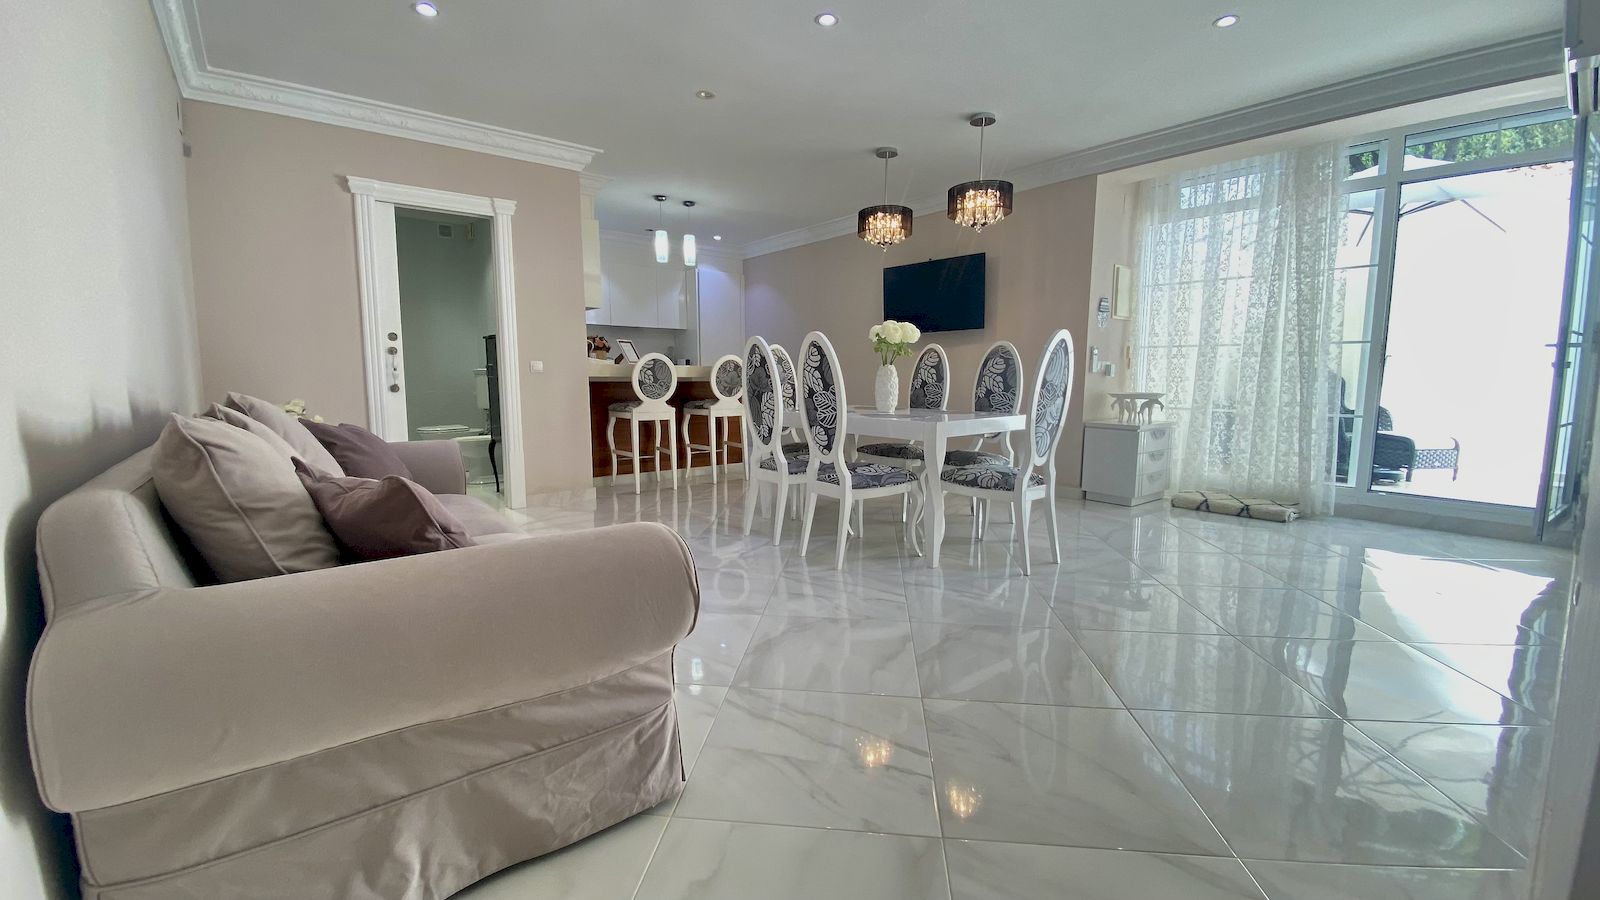 Luxury Villa for Sale with Sea View in Adsubia - Javea